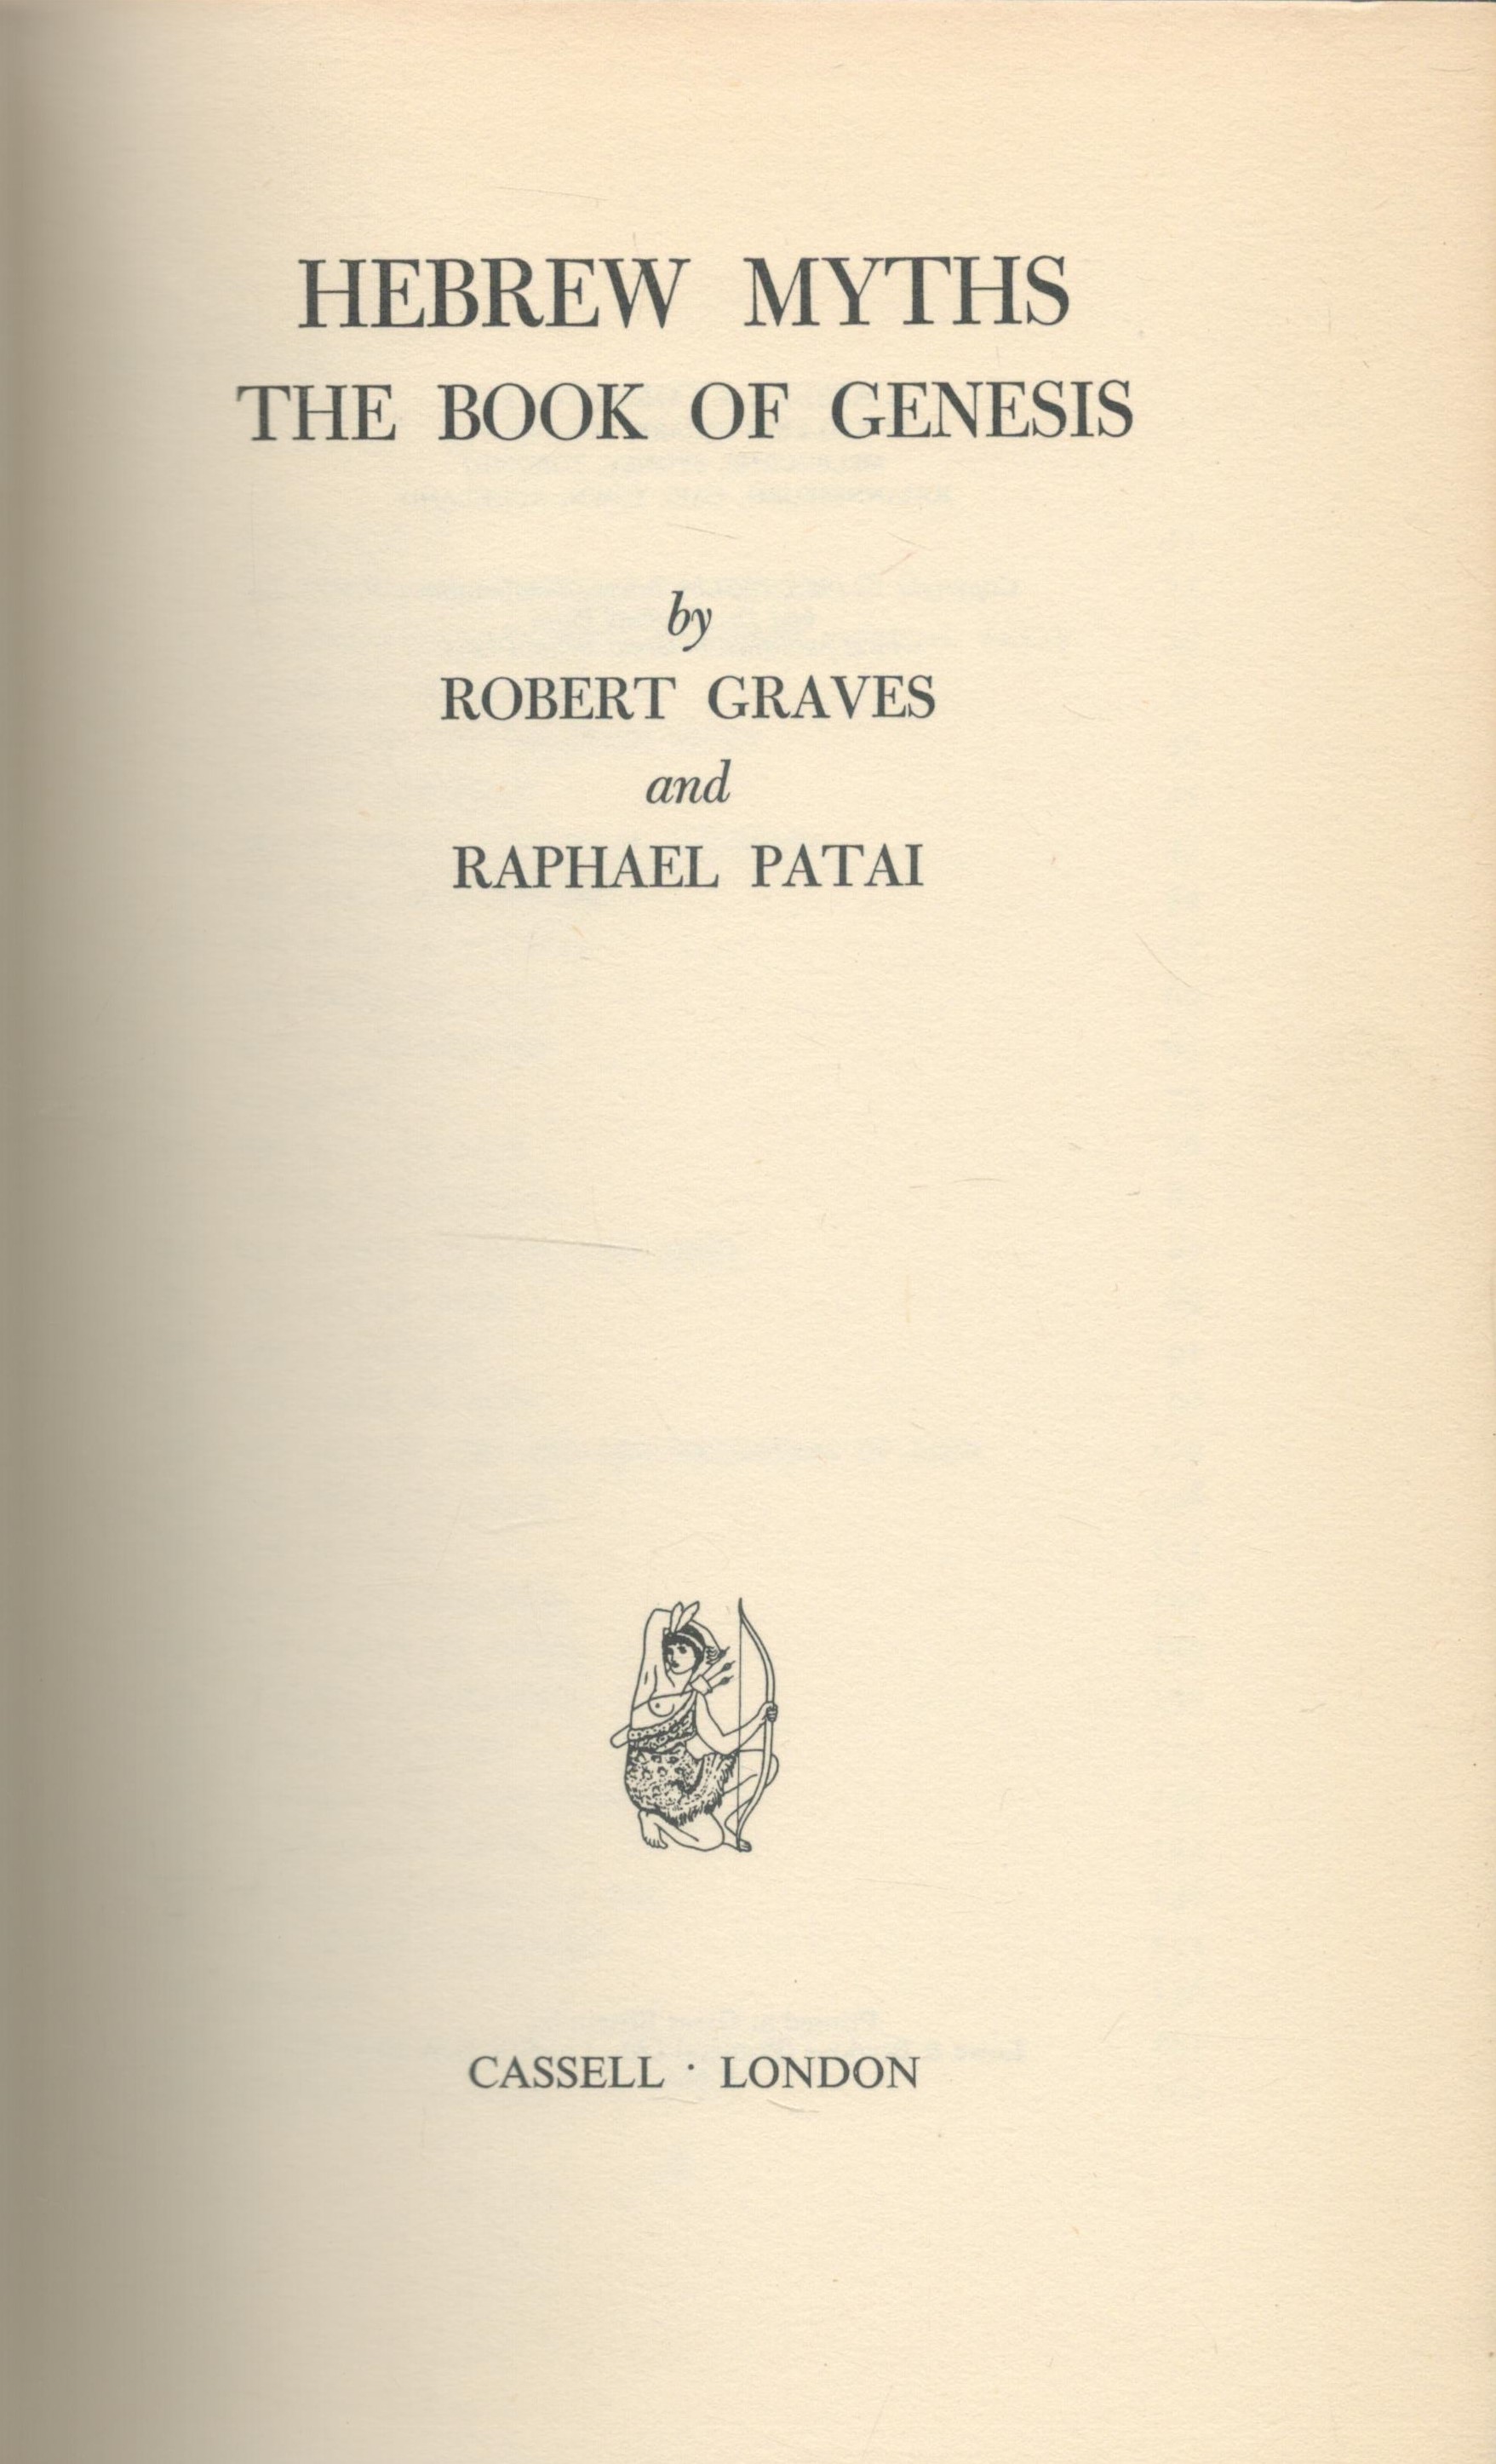 Robert Graves and Raphael Patai Hebrew Myths The Book of Genesis. Published by Cassell, London 1964. - Image 2 of 3